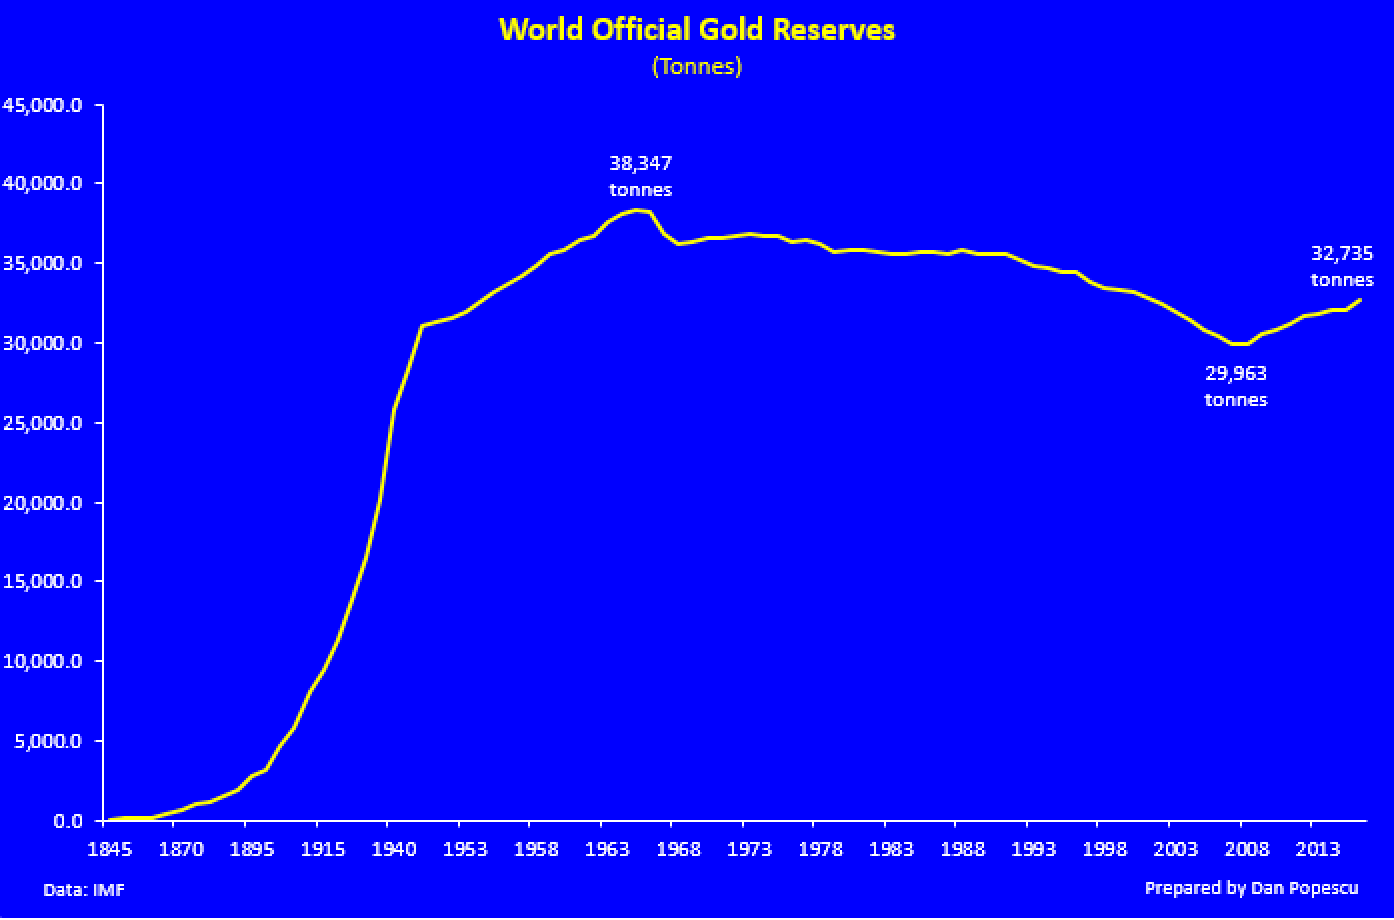 World official gold reserves